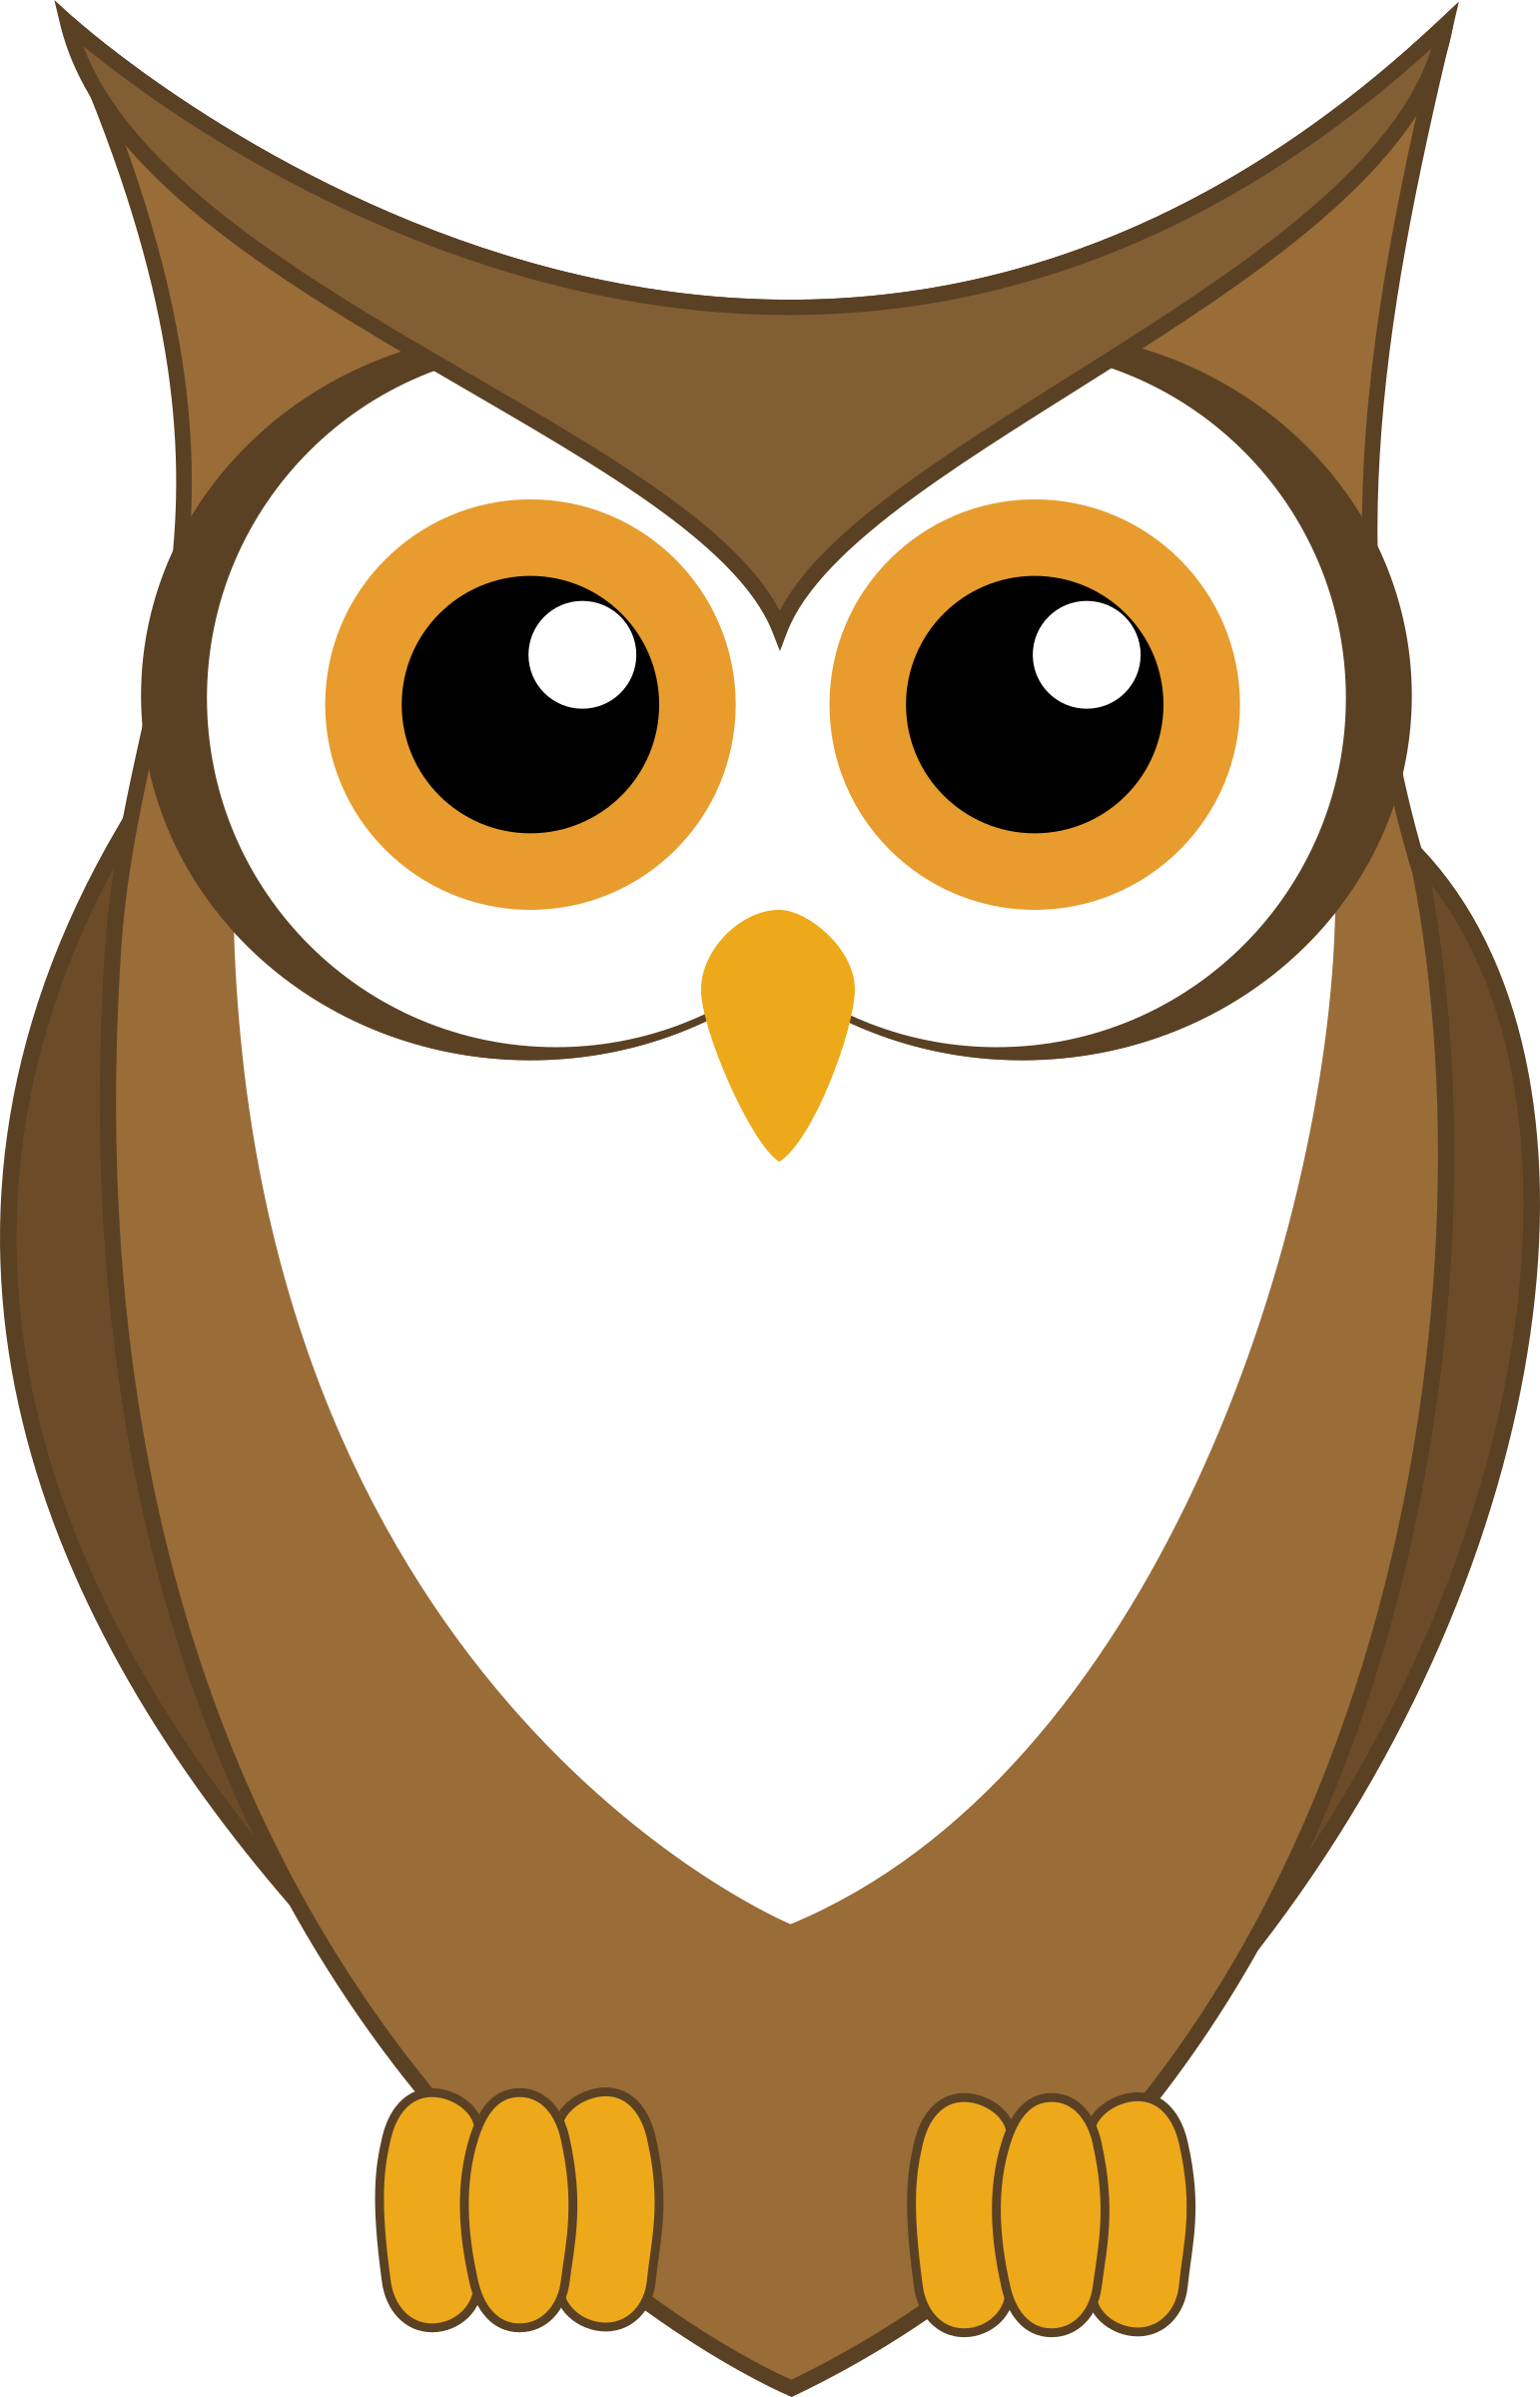 Owl clipart head, Owl head Transparent FREE for download ...